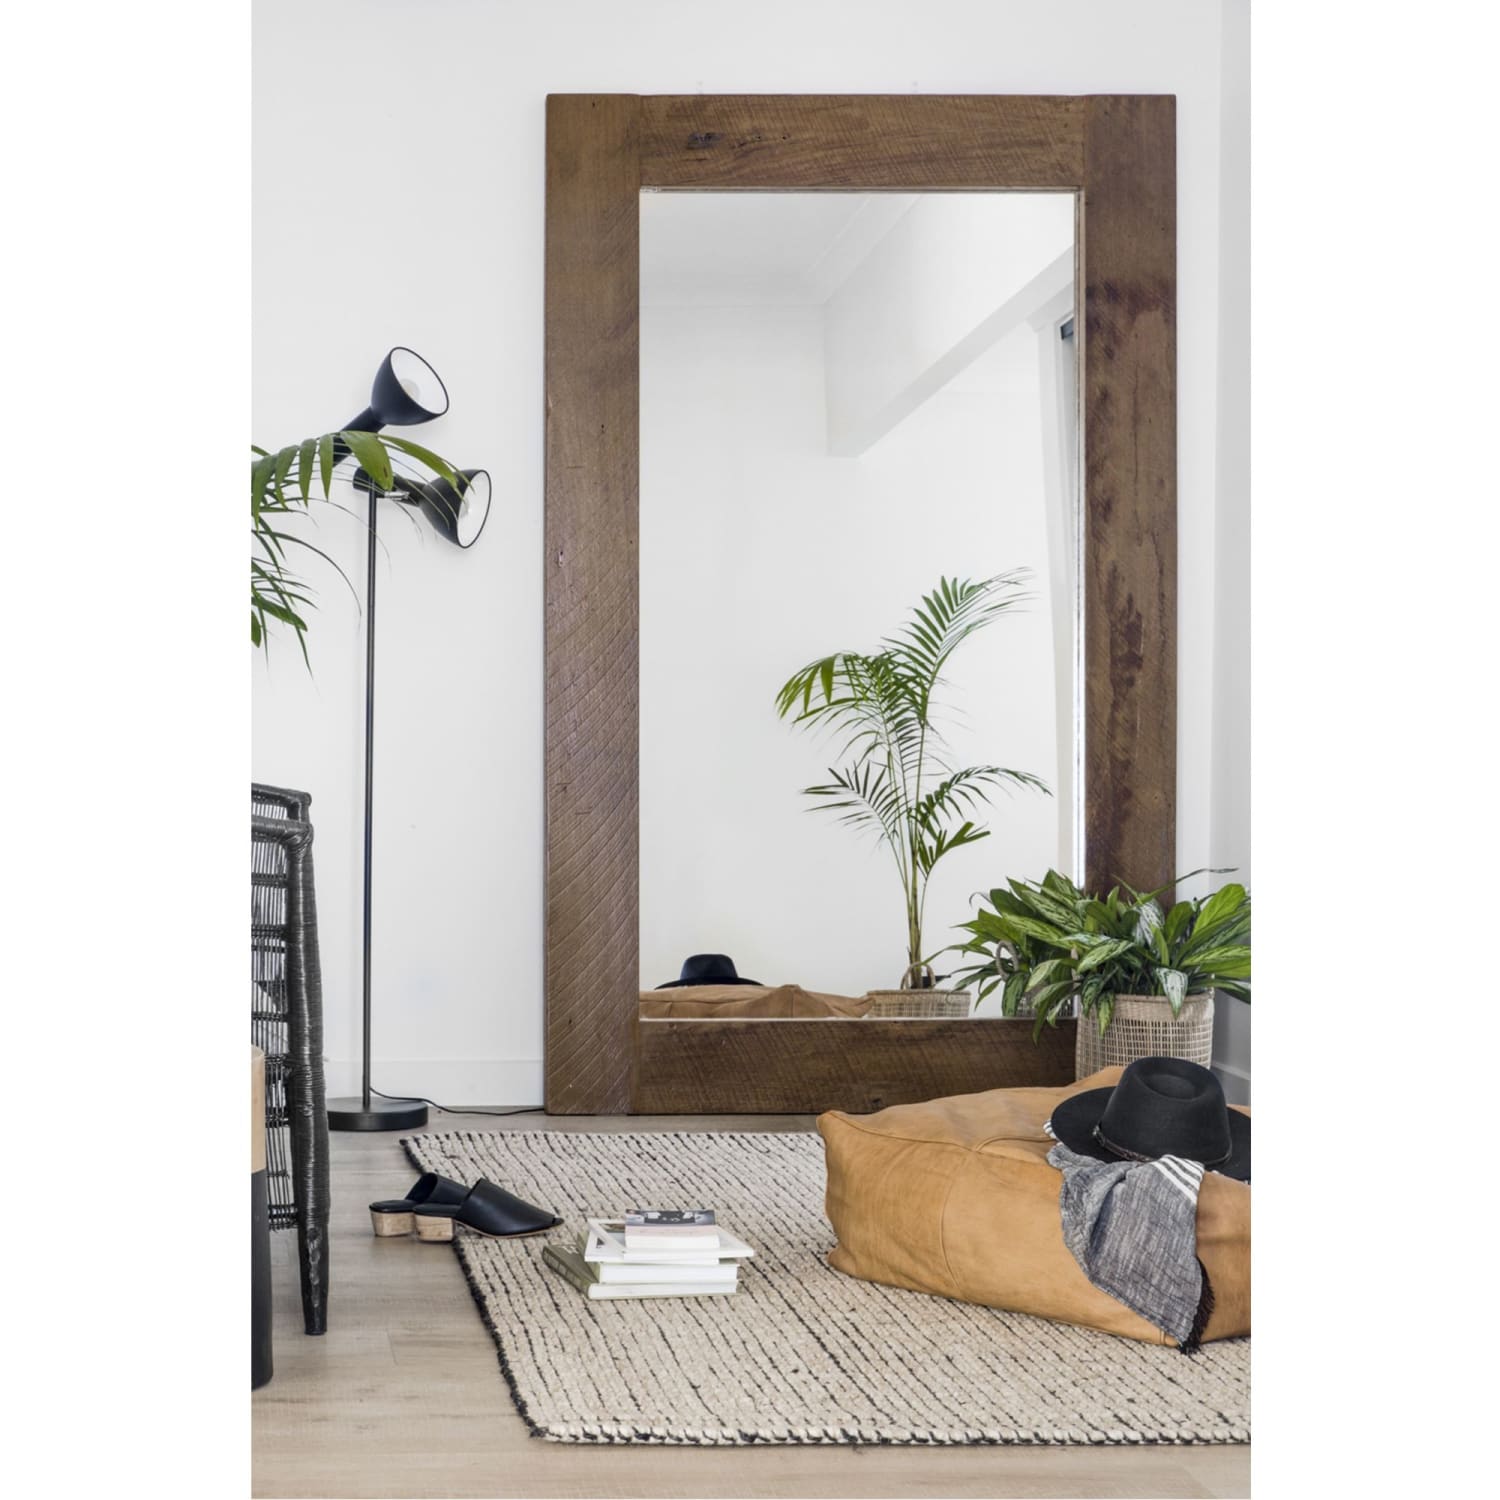 Classic wood frame oversized mirror